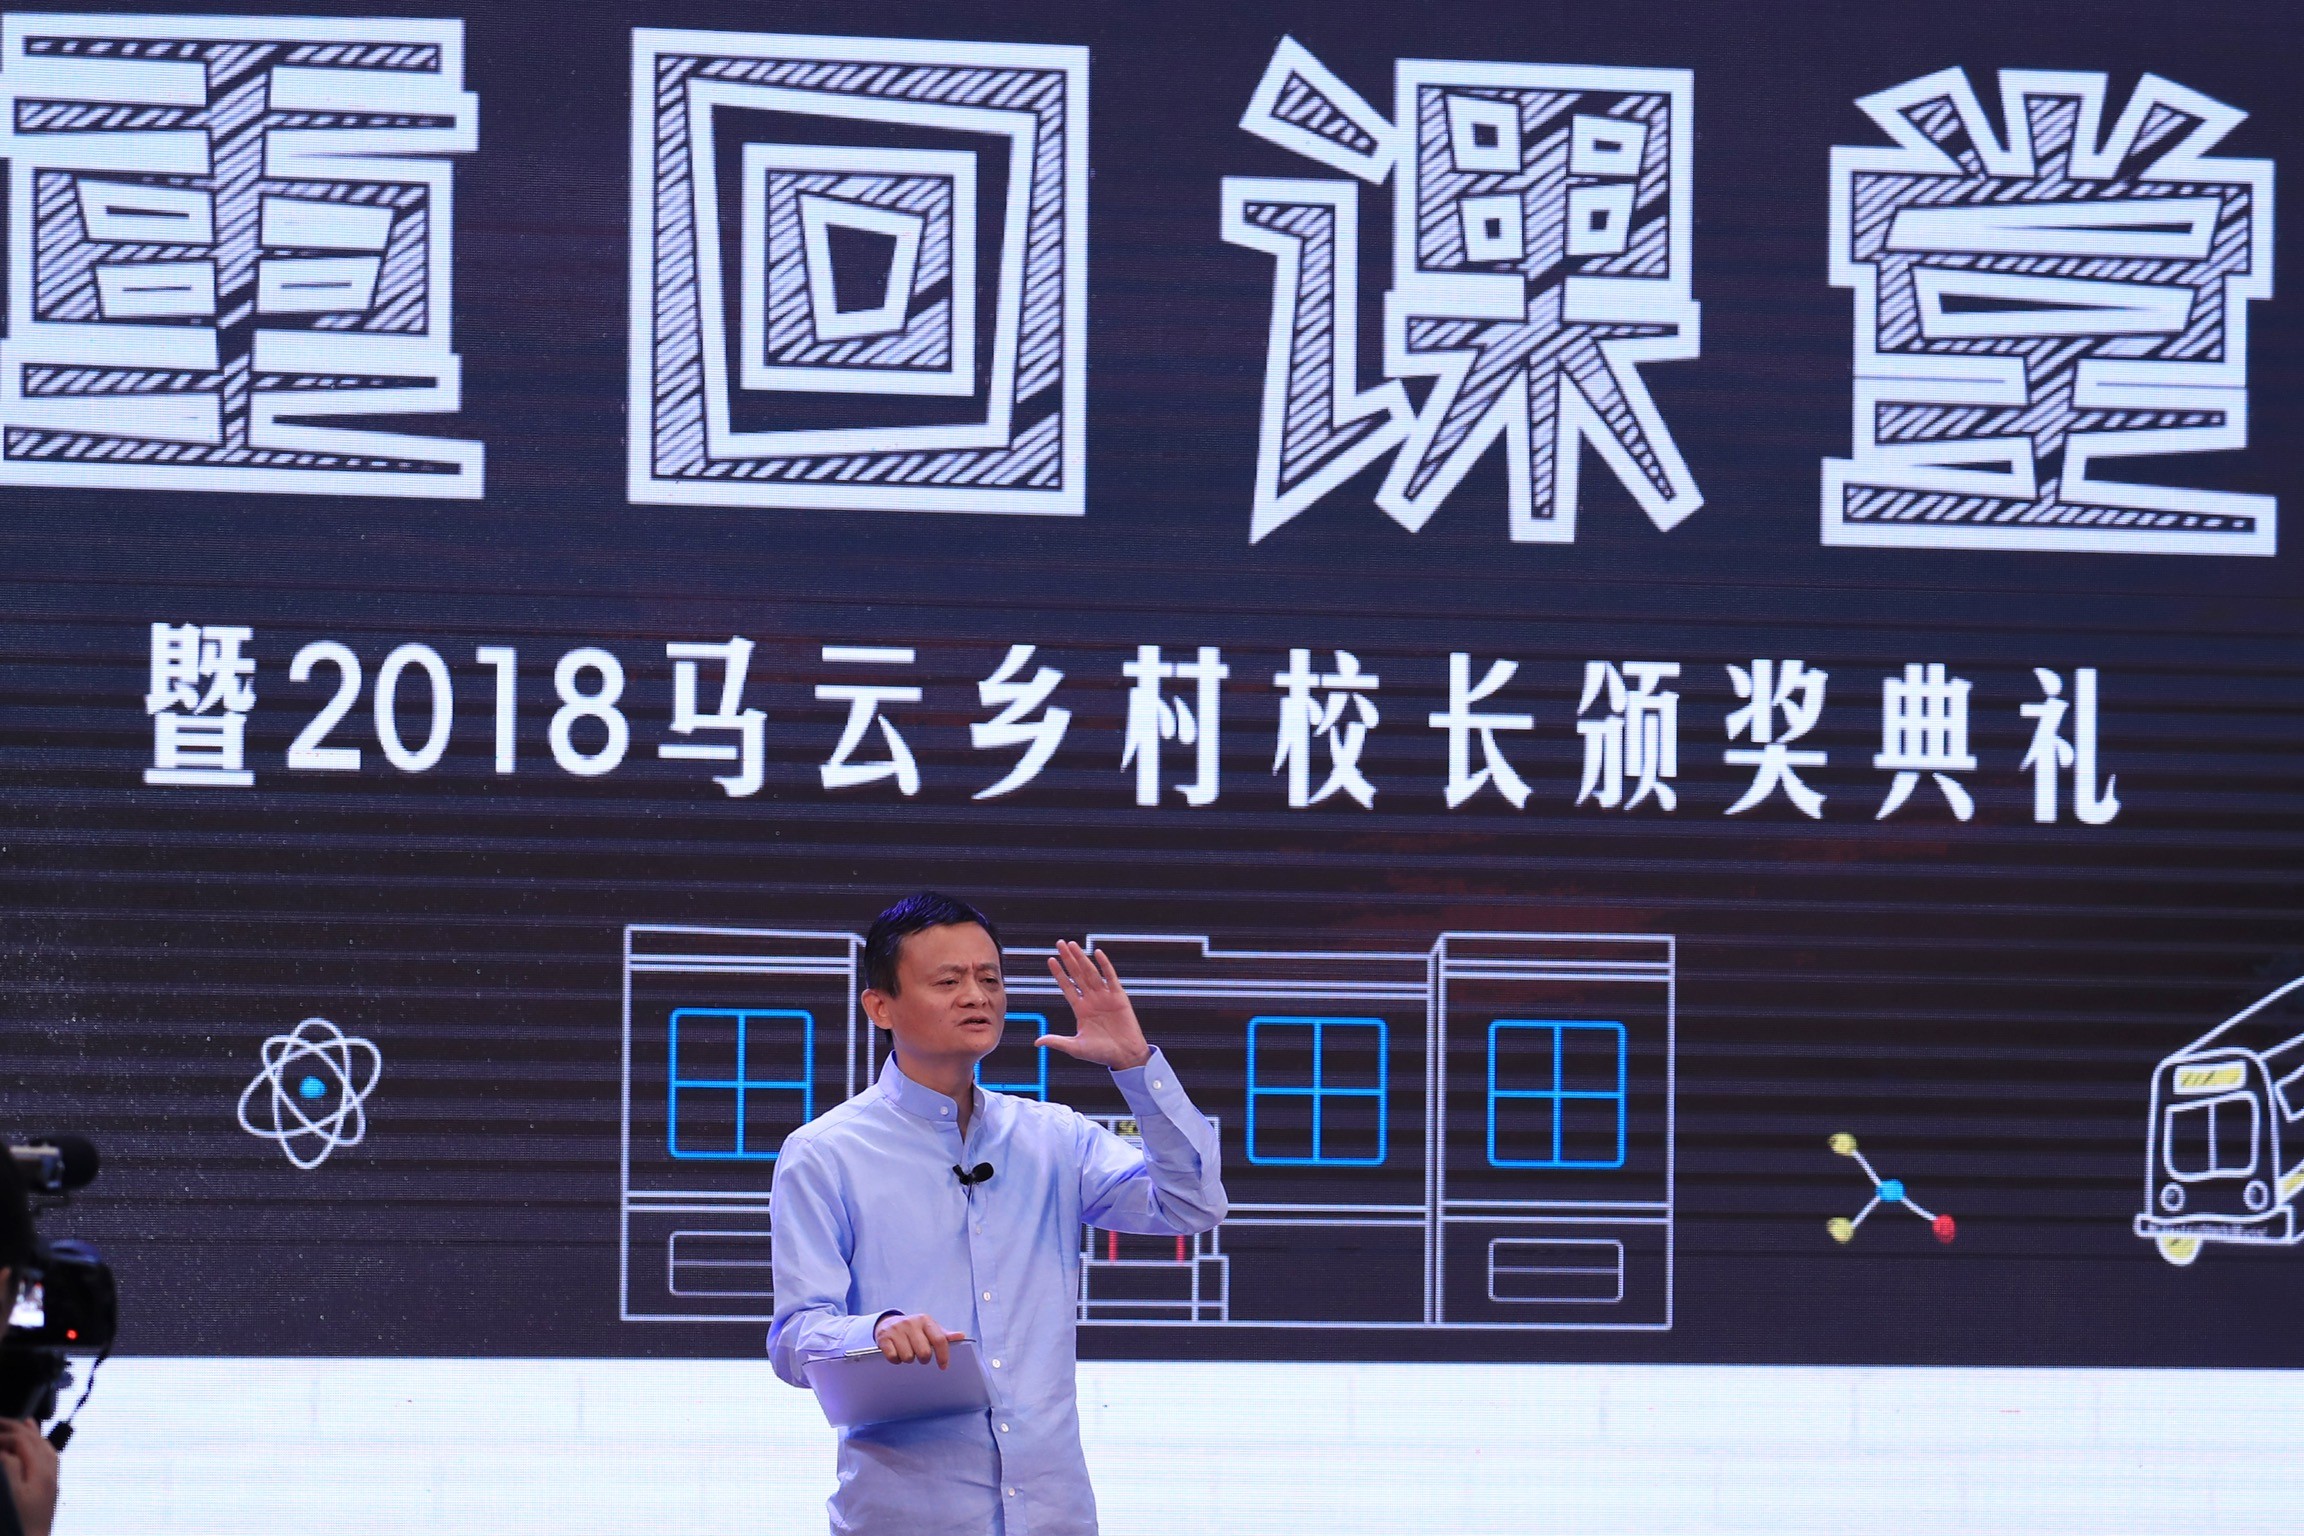 Jack Ma, co-founder and former chairman of Alibaba Group Holding, during a lecture on 13 January 2019 to Chinese village teachers during the 2018 Rural Teacher Awards by the Jack Ma Foundation in Sanya on Hainan island. Photo: Imaginechina